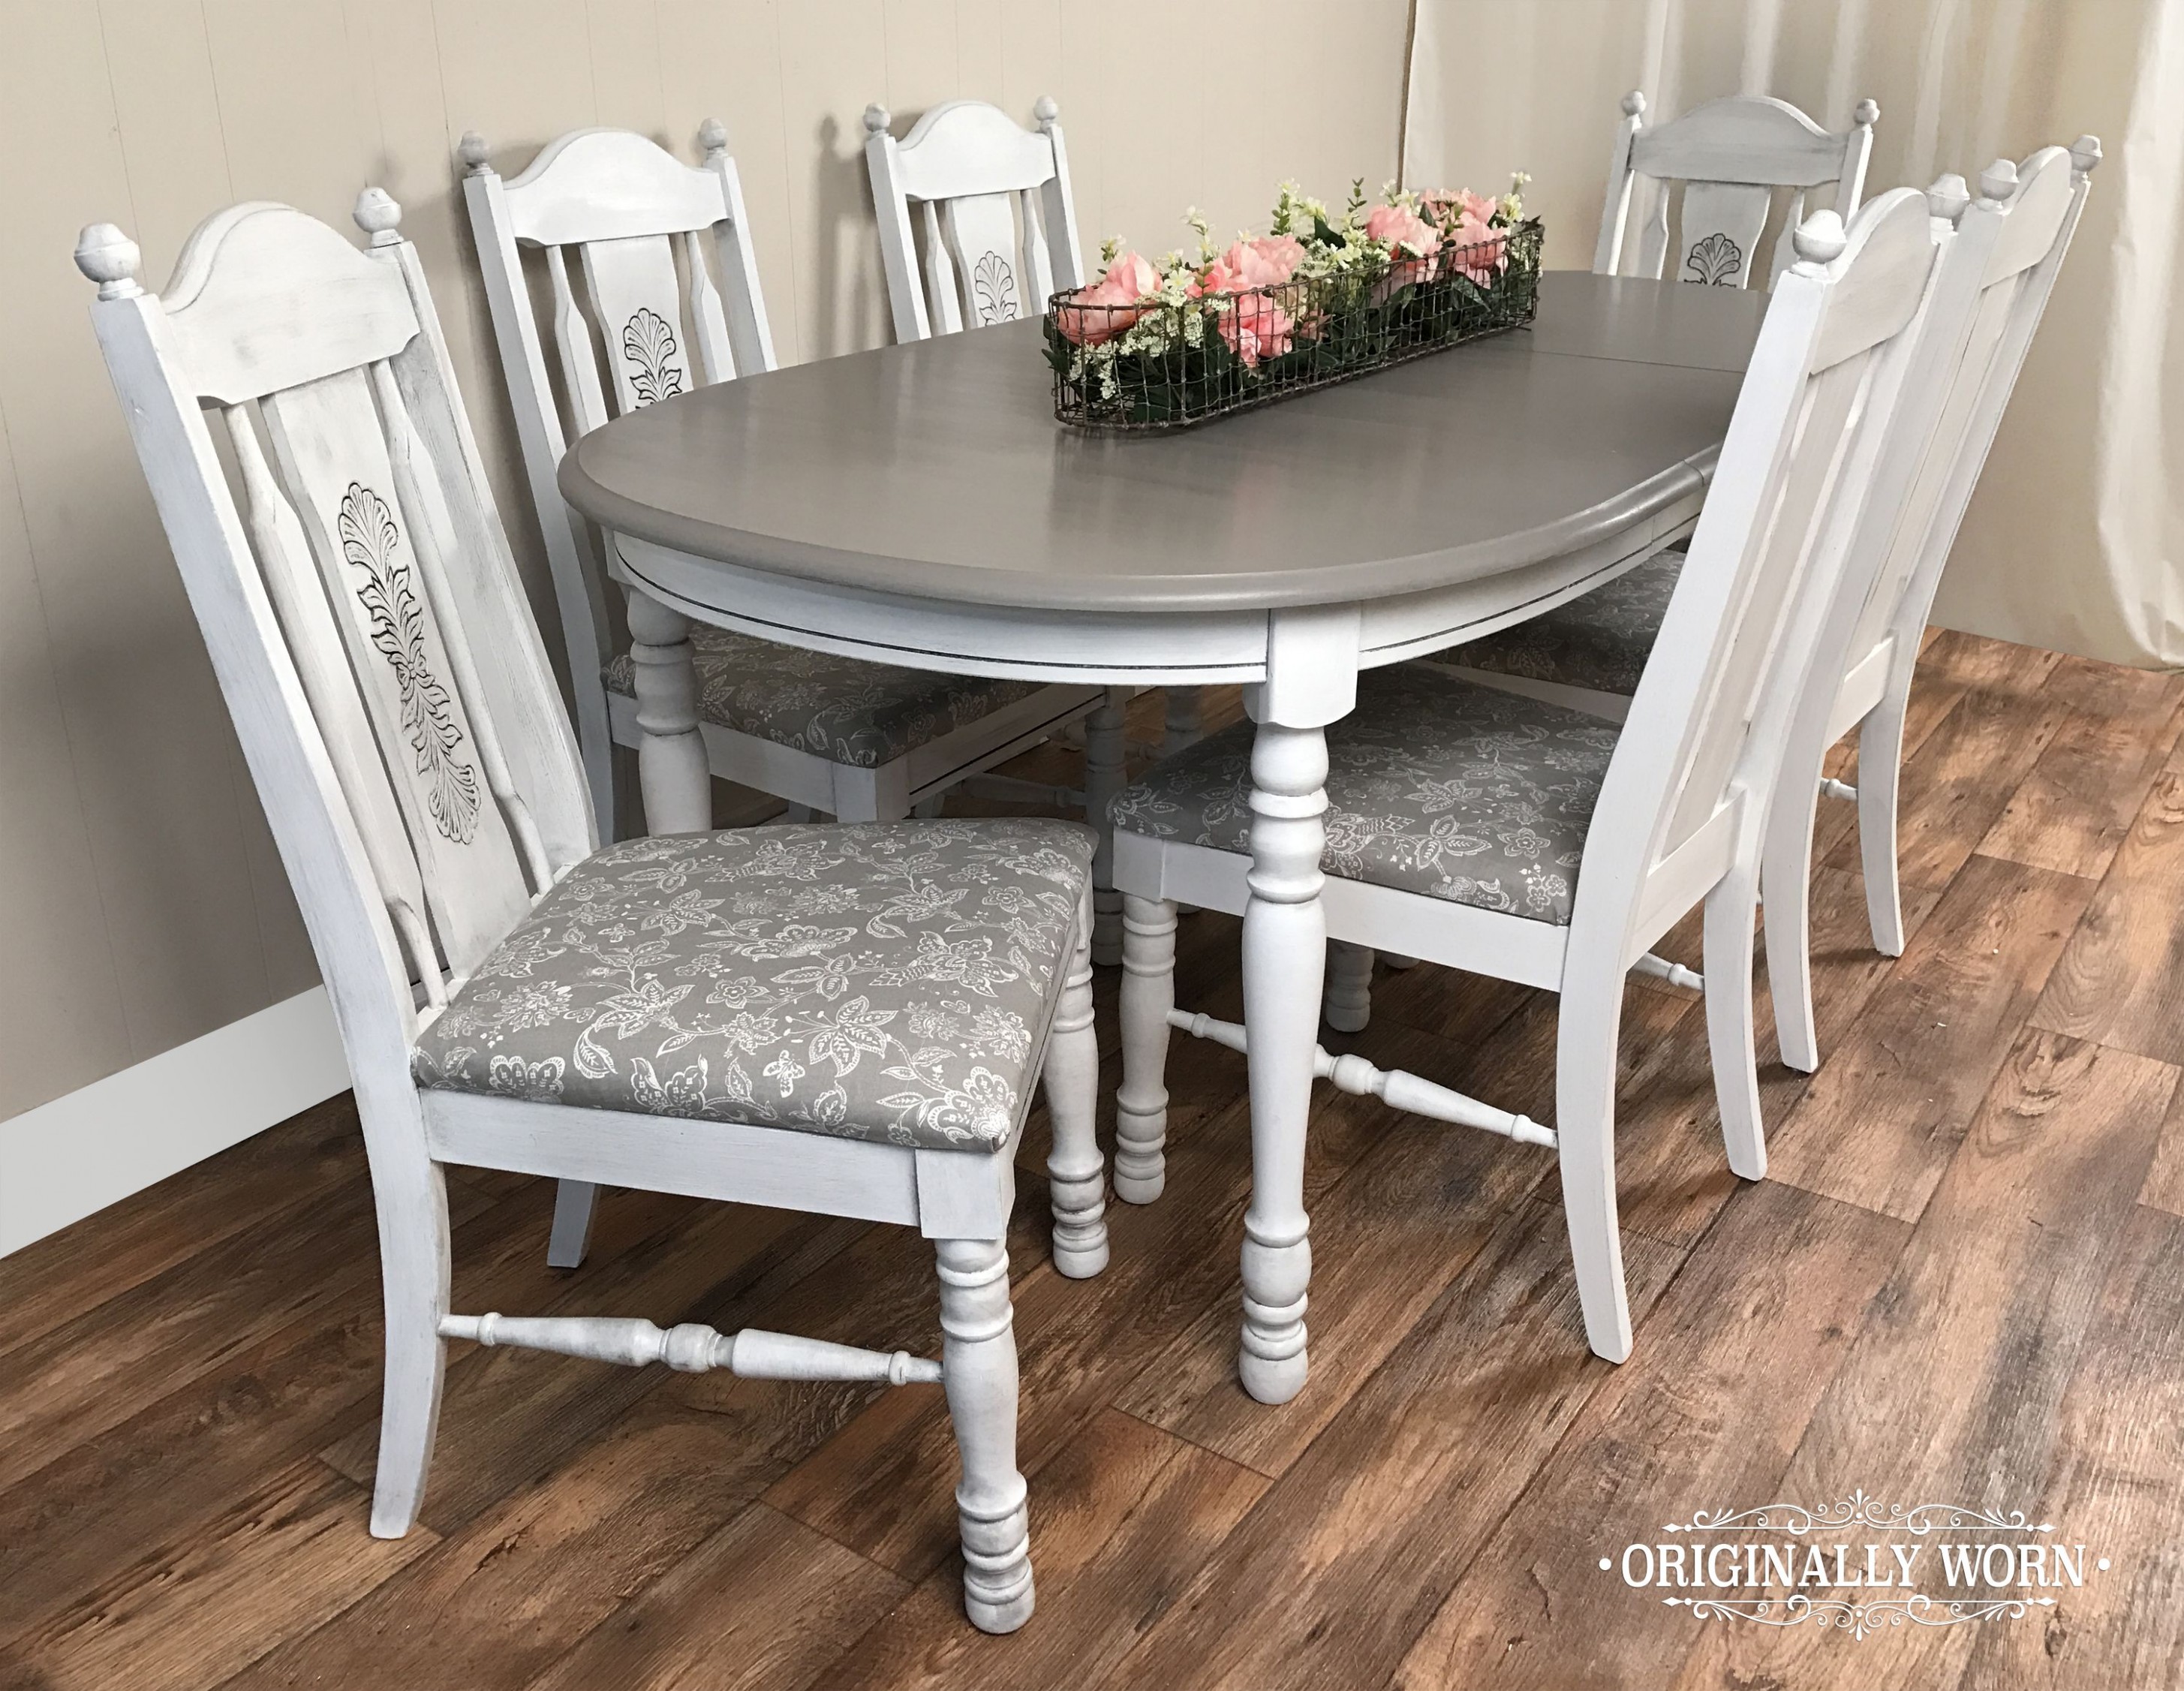 6 Piece Oval Dining Set In Annie Sloan Chalk Paint In Pure White ..